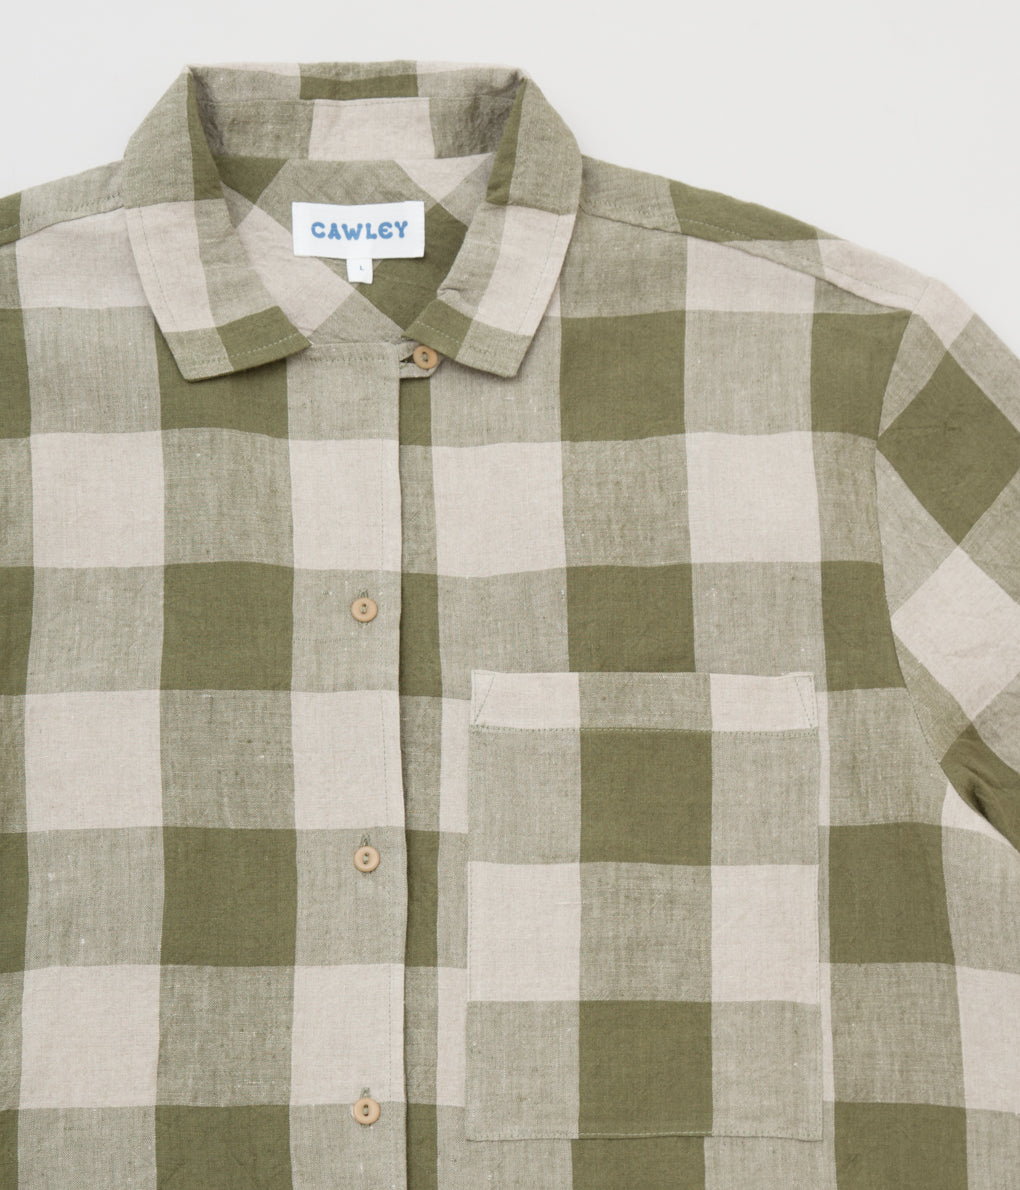 CAWLEY "AUGUST SHIRT" (GREEN FLAX)